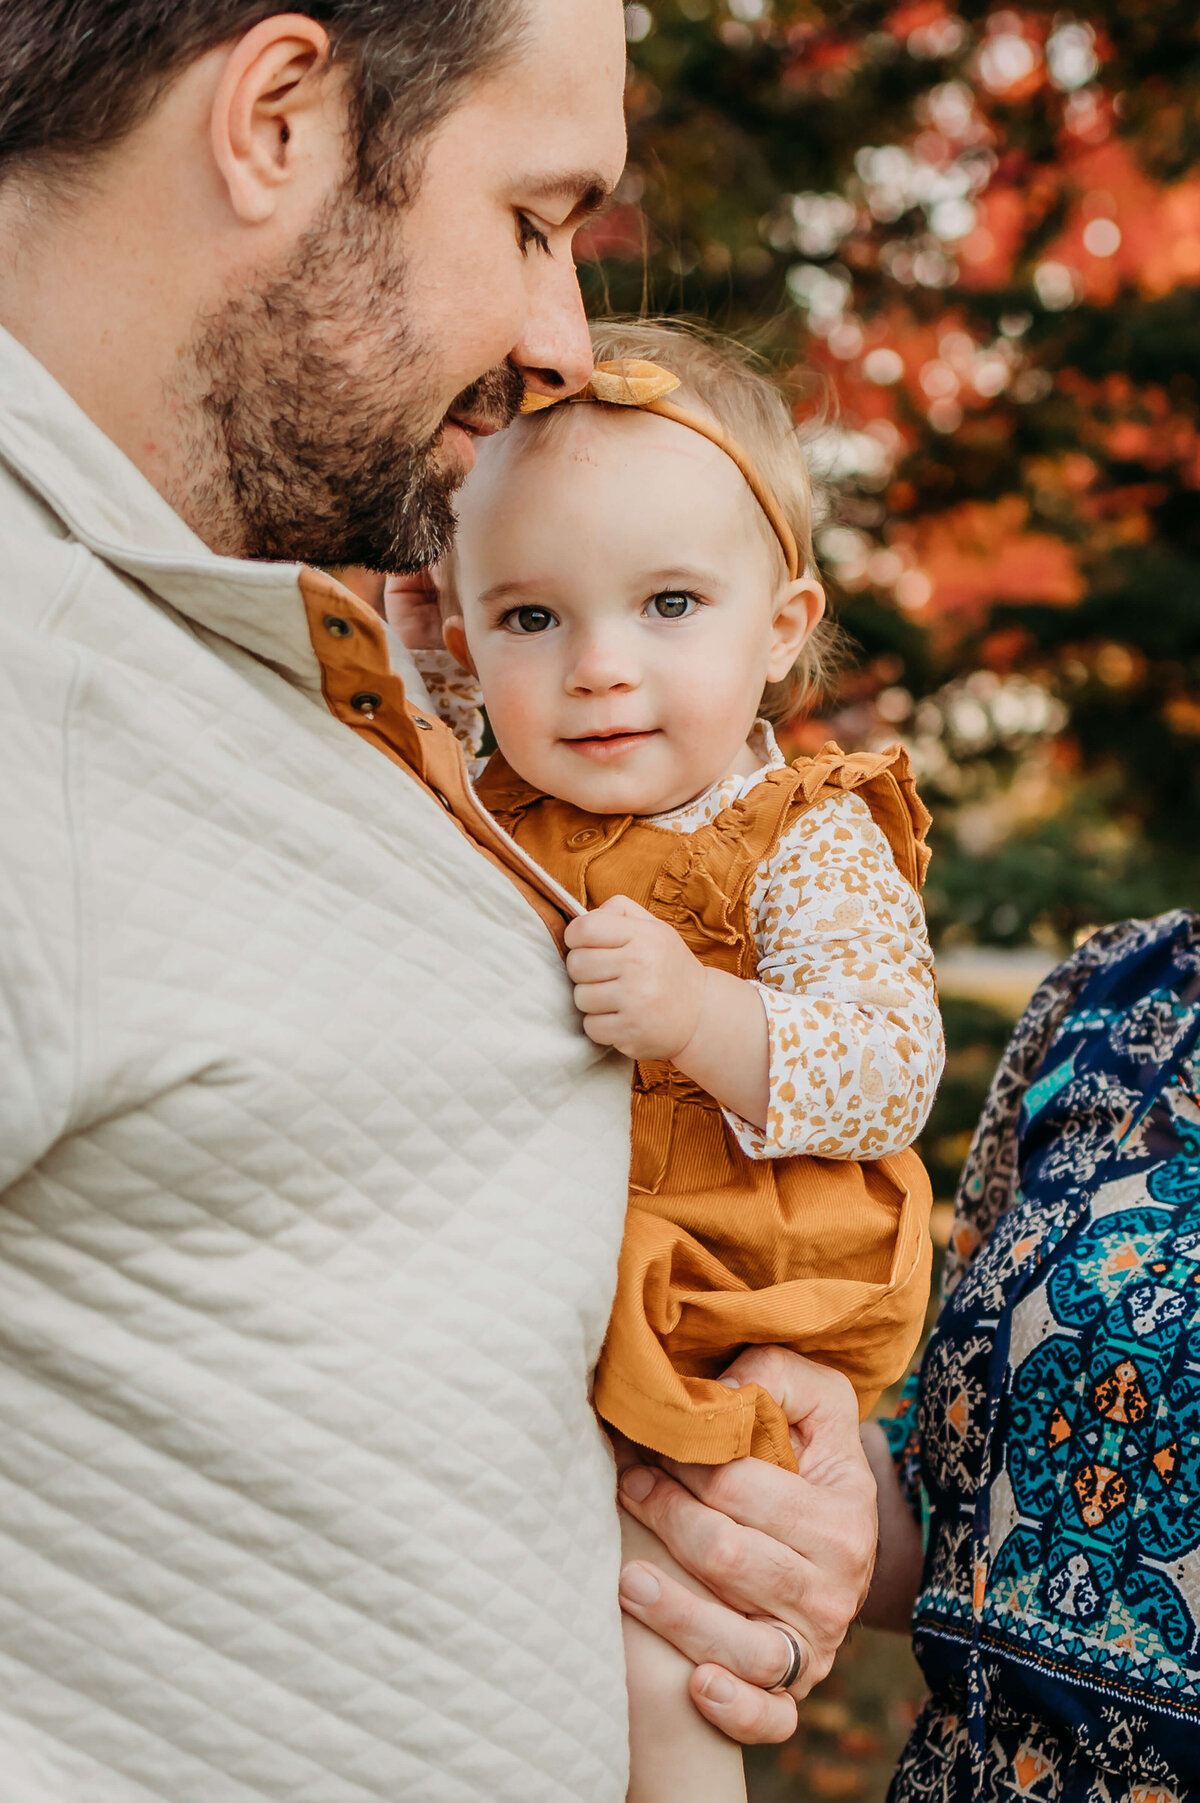 An Eau Claire family photo session of  a baby girl holding dad's shirt and looking at camera near